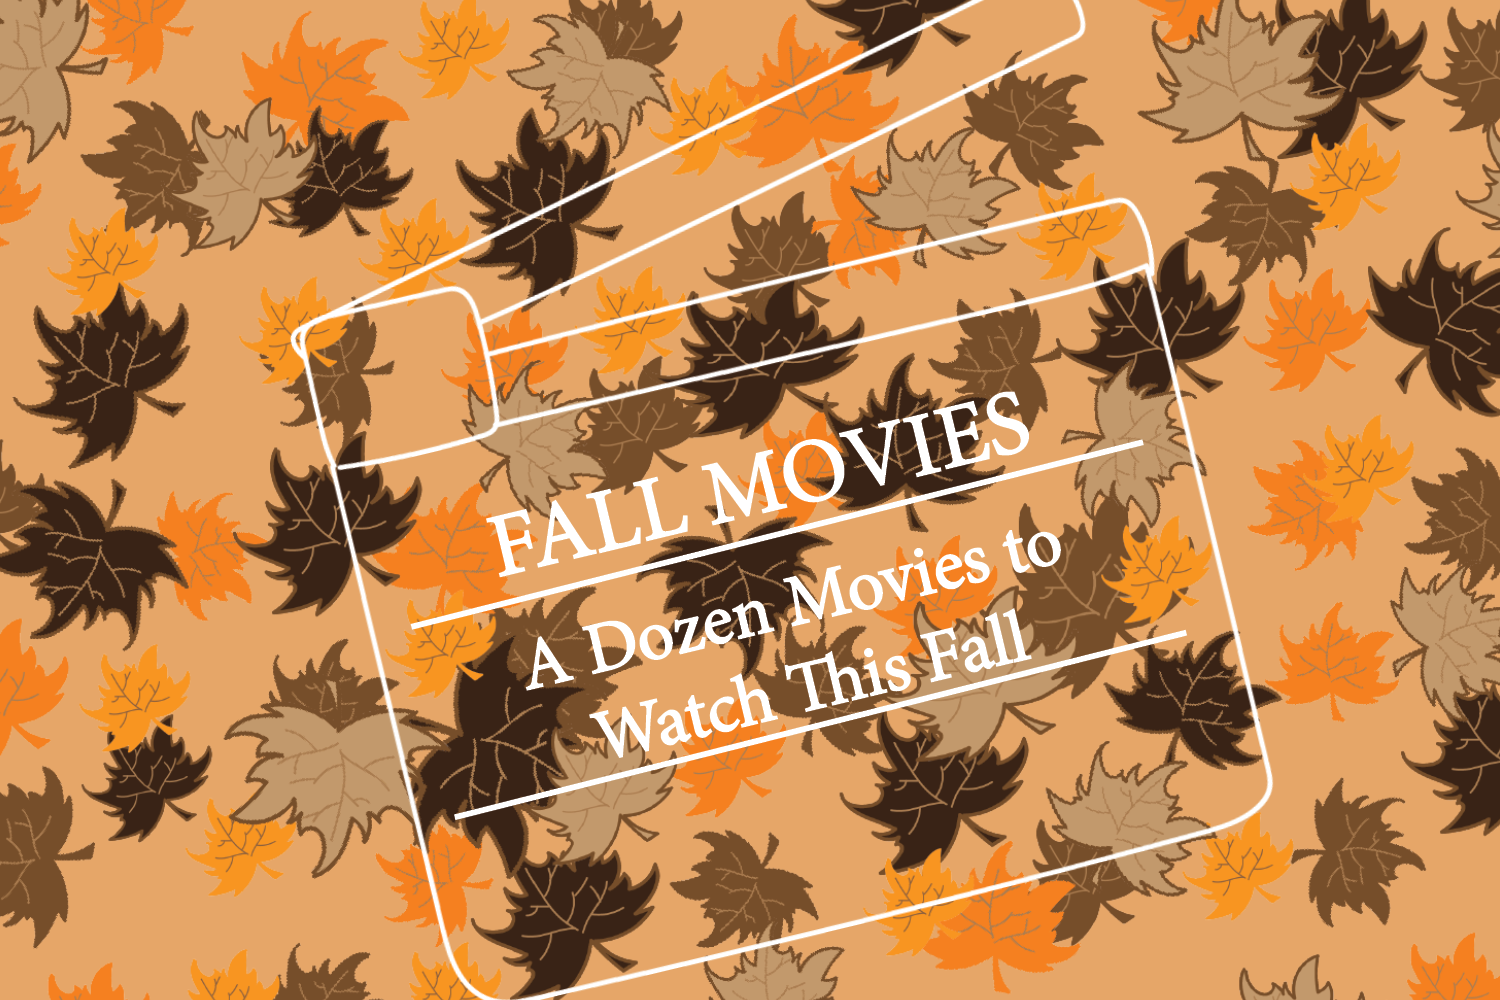 A Dozen Movies to Watch This Fall PHS News